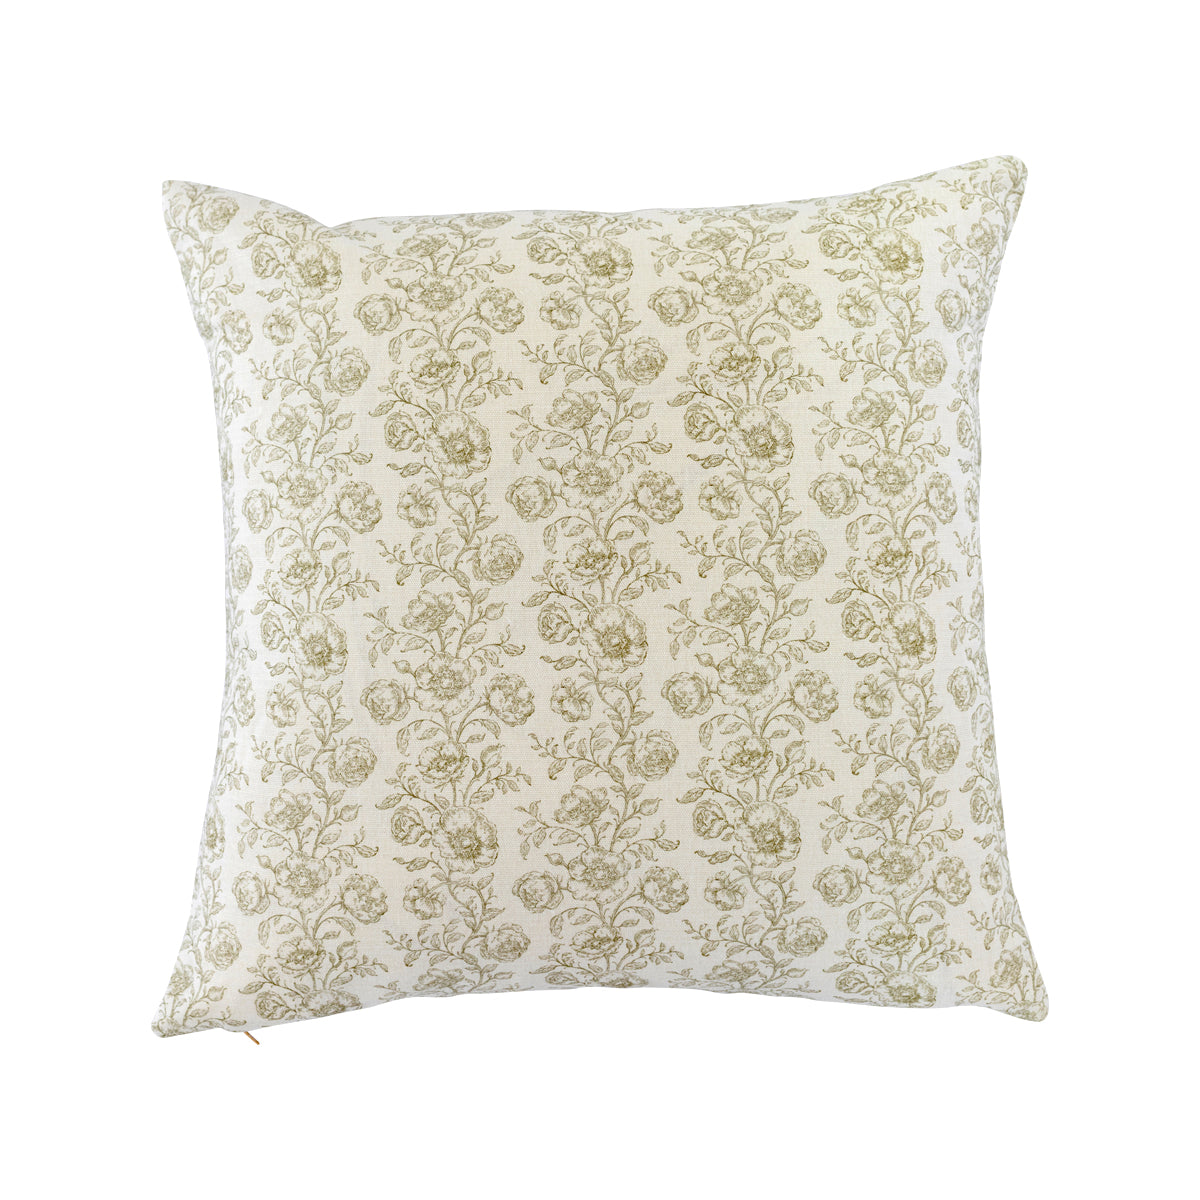 Mabel Lynn Pillow Cover - Olive - 22" x 22"